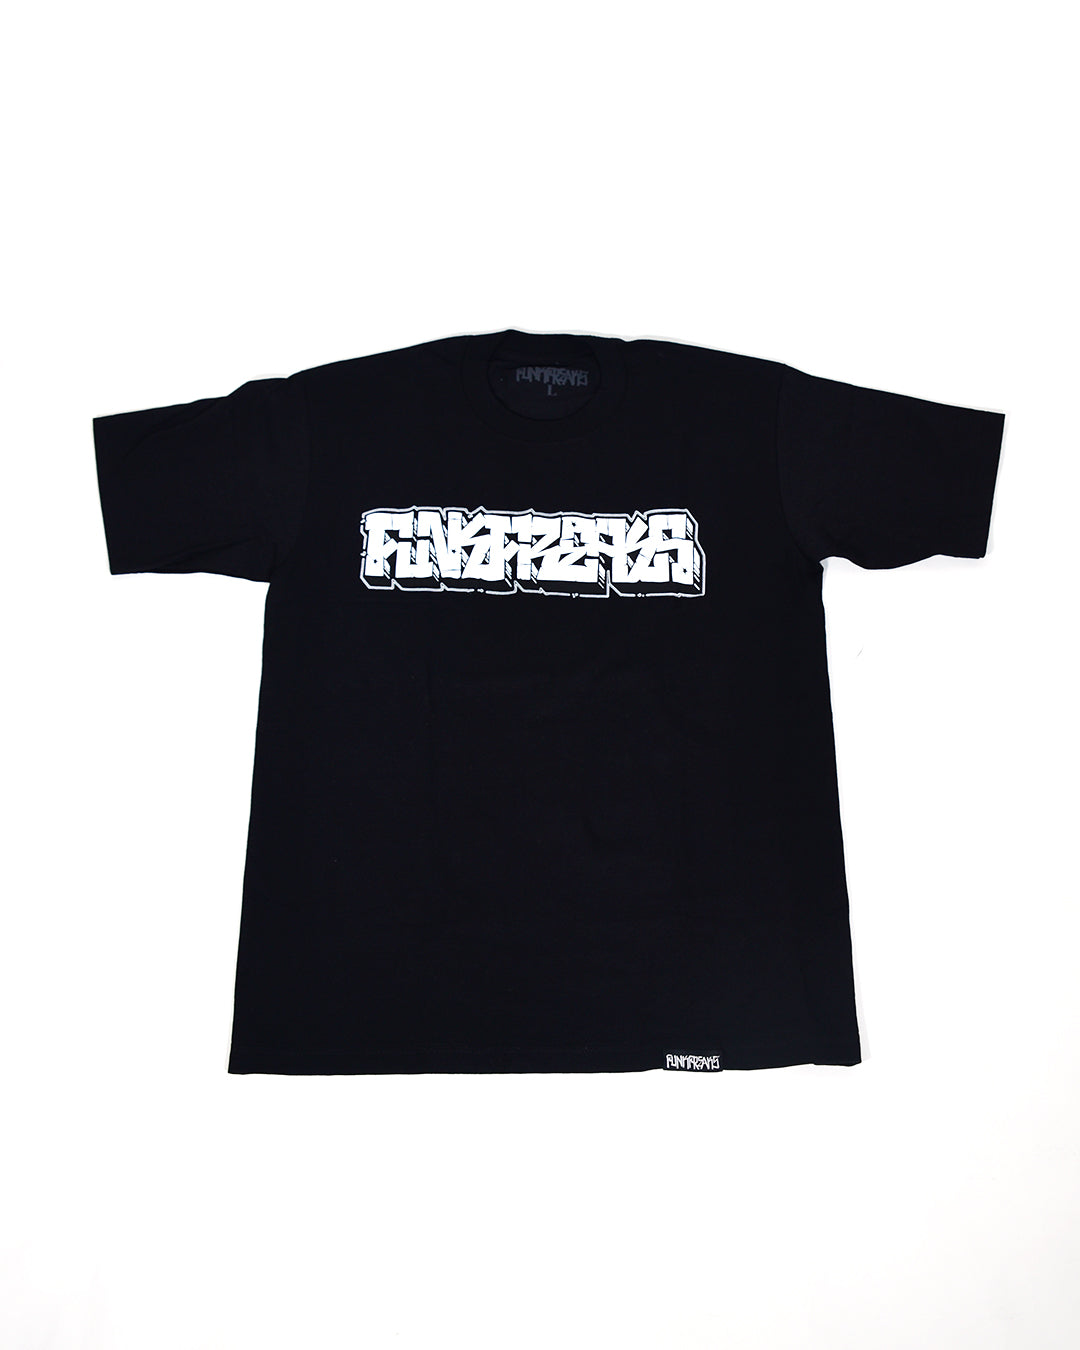 FUNKFREAKS CANT BE STOPPED S/S Tee